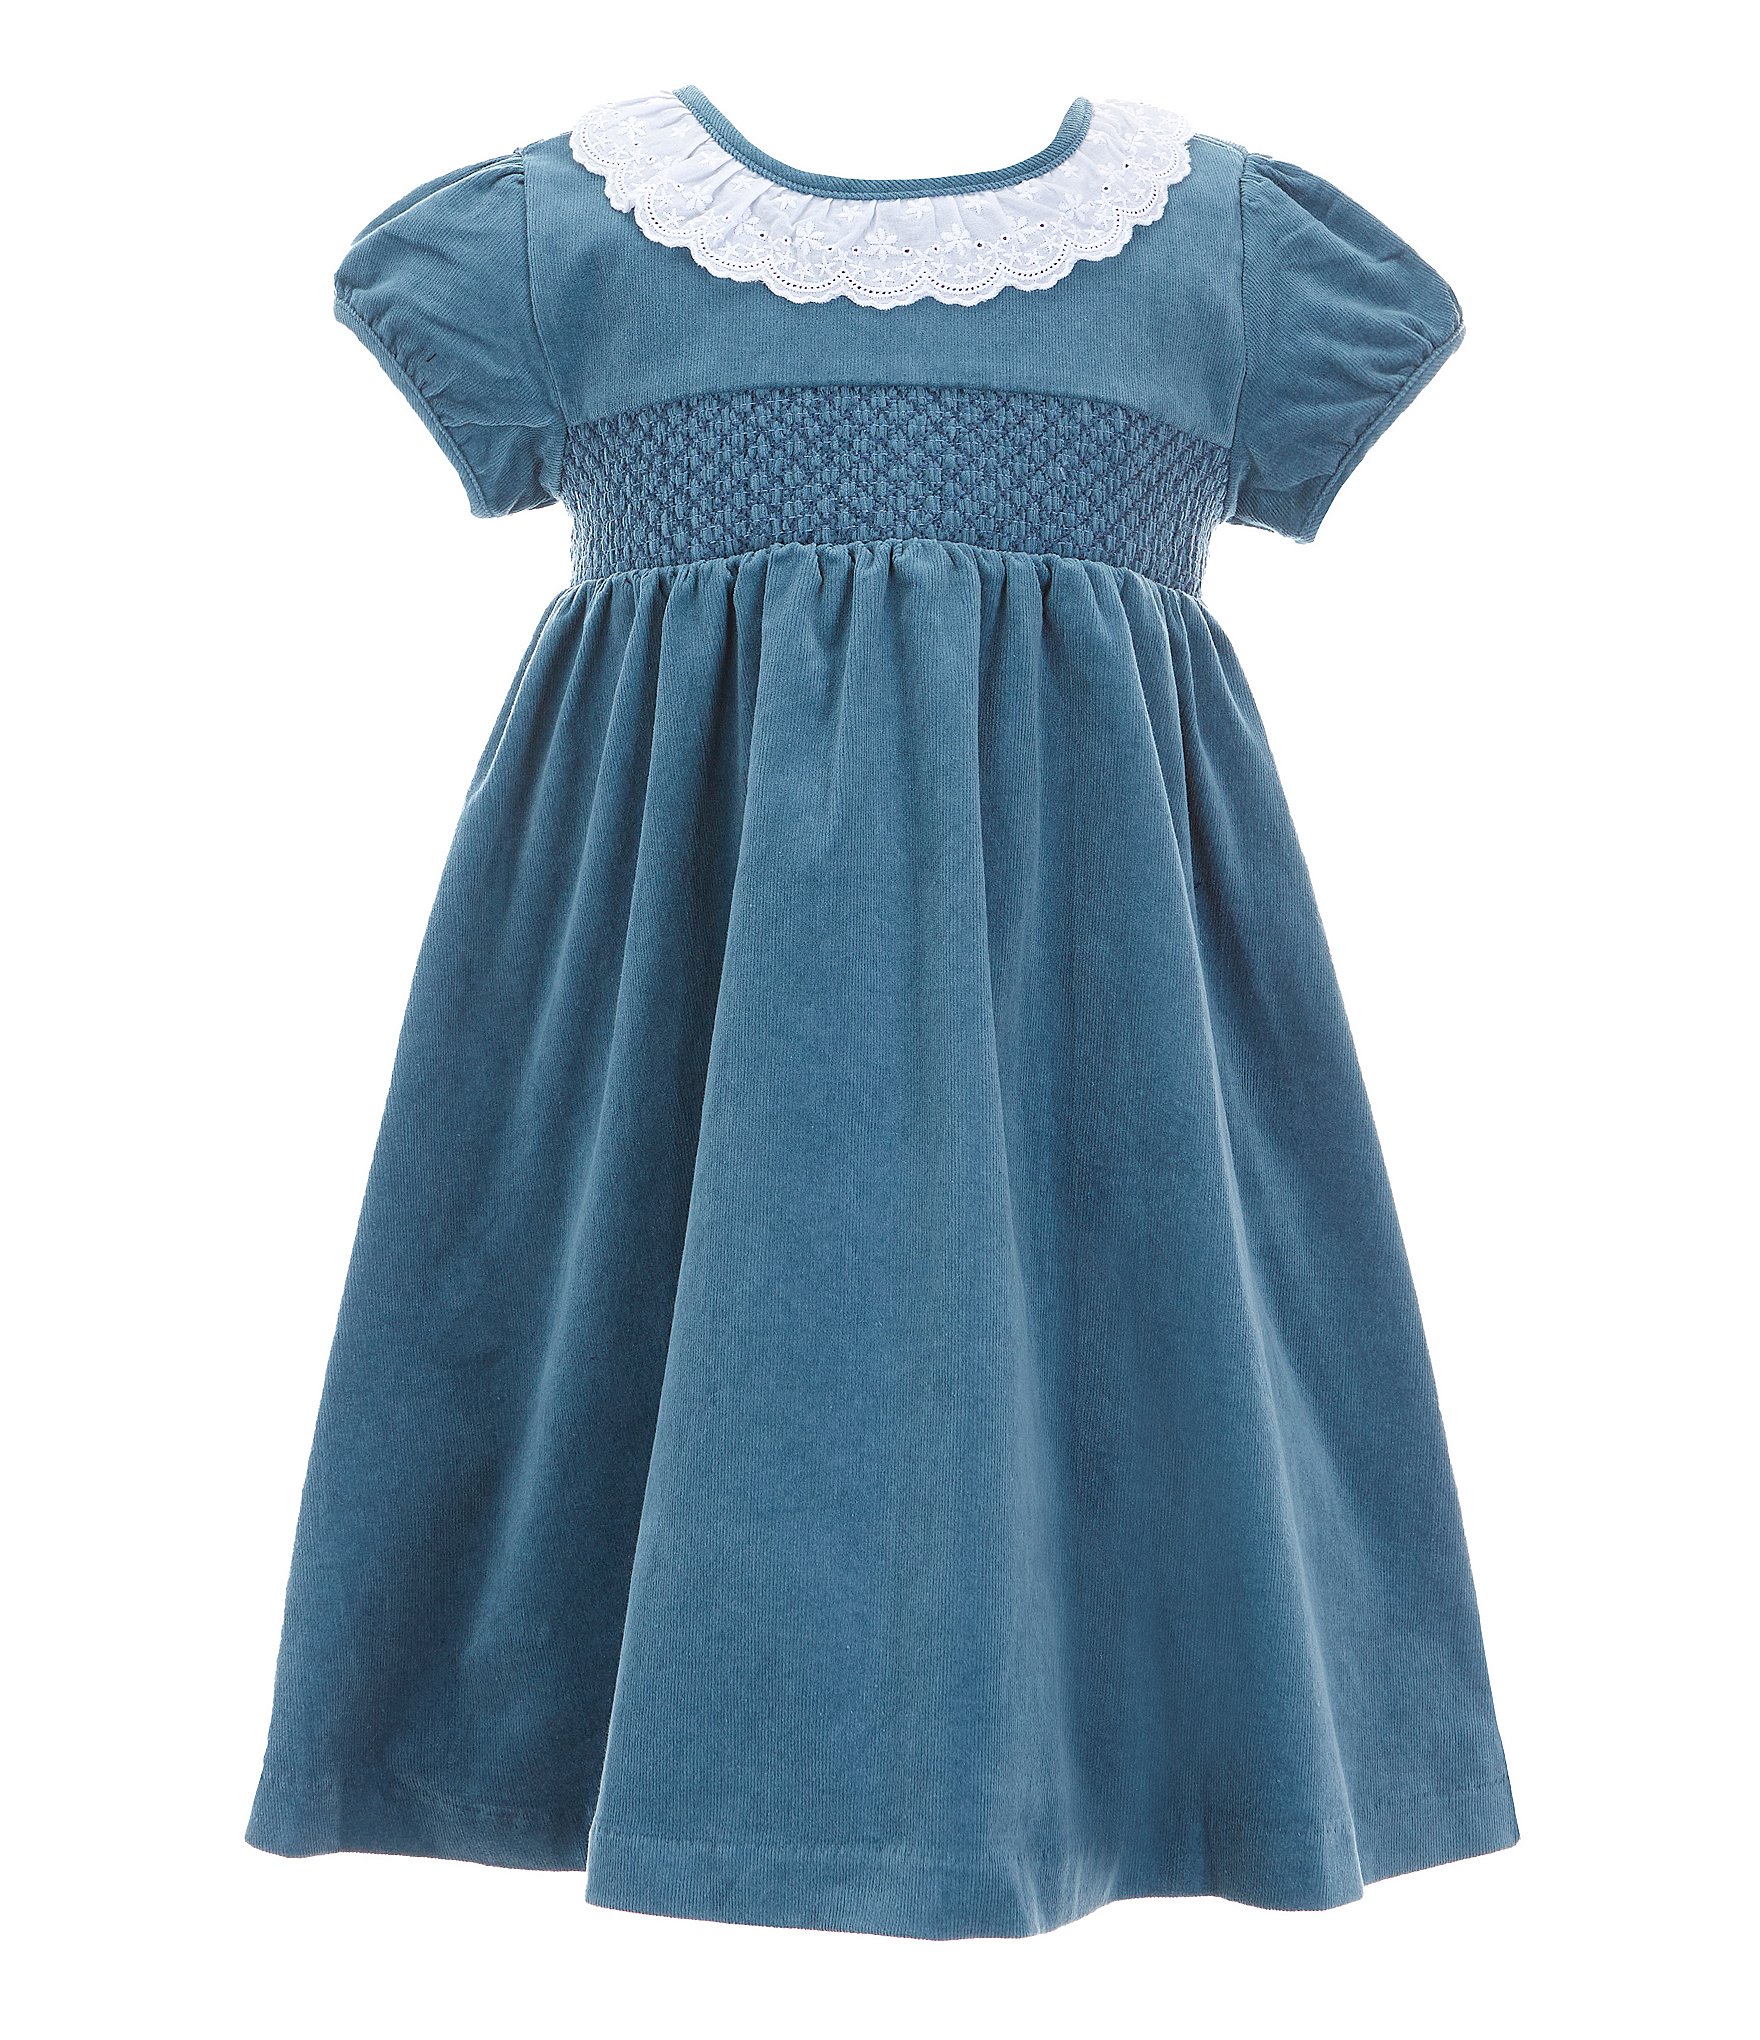 wybzd Baby Girls Fly Sleeve Dress Fashion Solid Color Round Neck Mesh Yarn  Stitching A-line Dress Blue 4-5 Years 